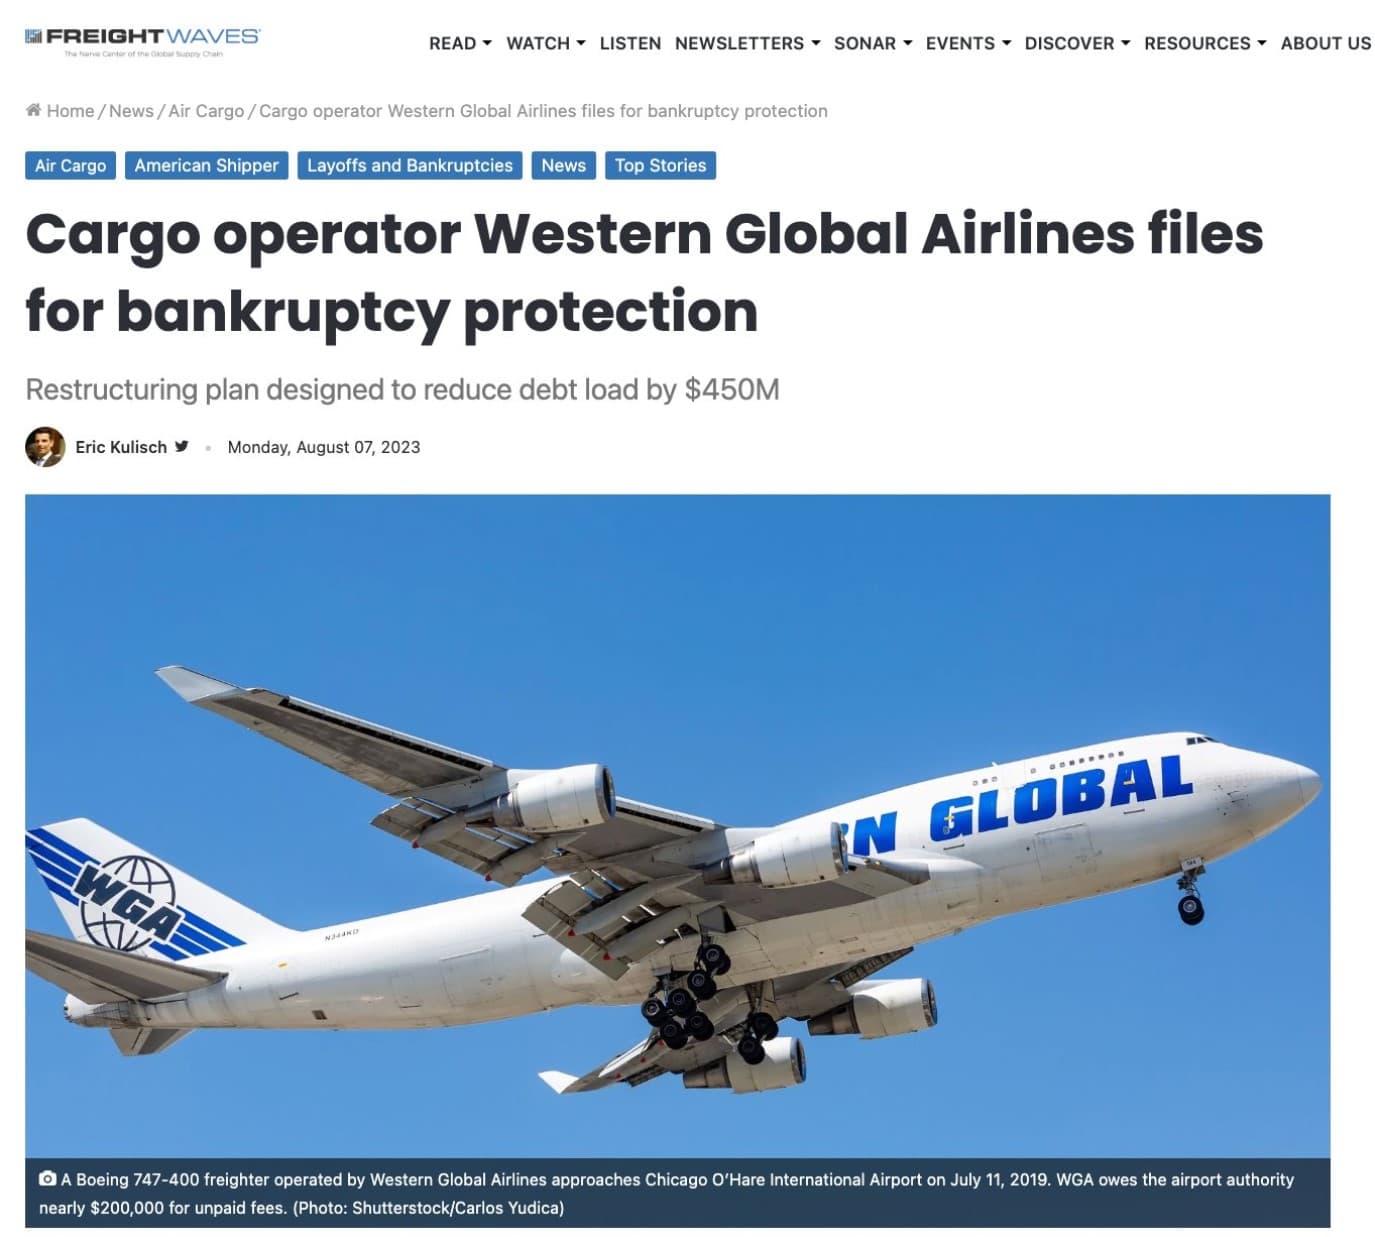 Nearly $500M in debt catches up to air cargo operator Western Global Airlines